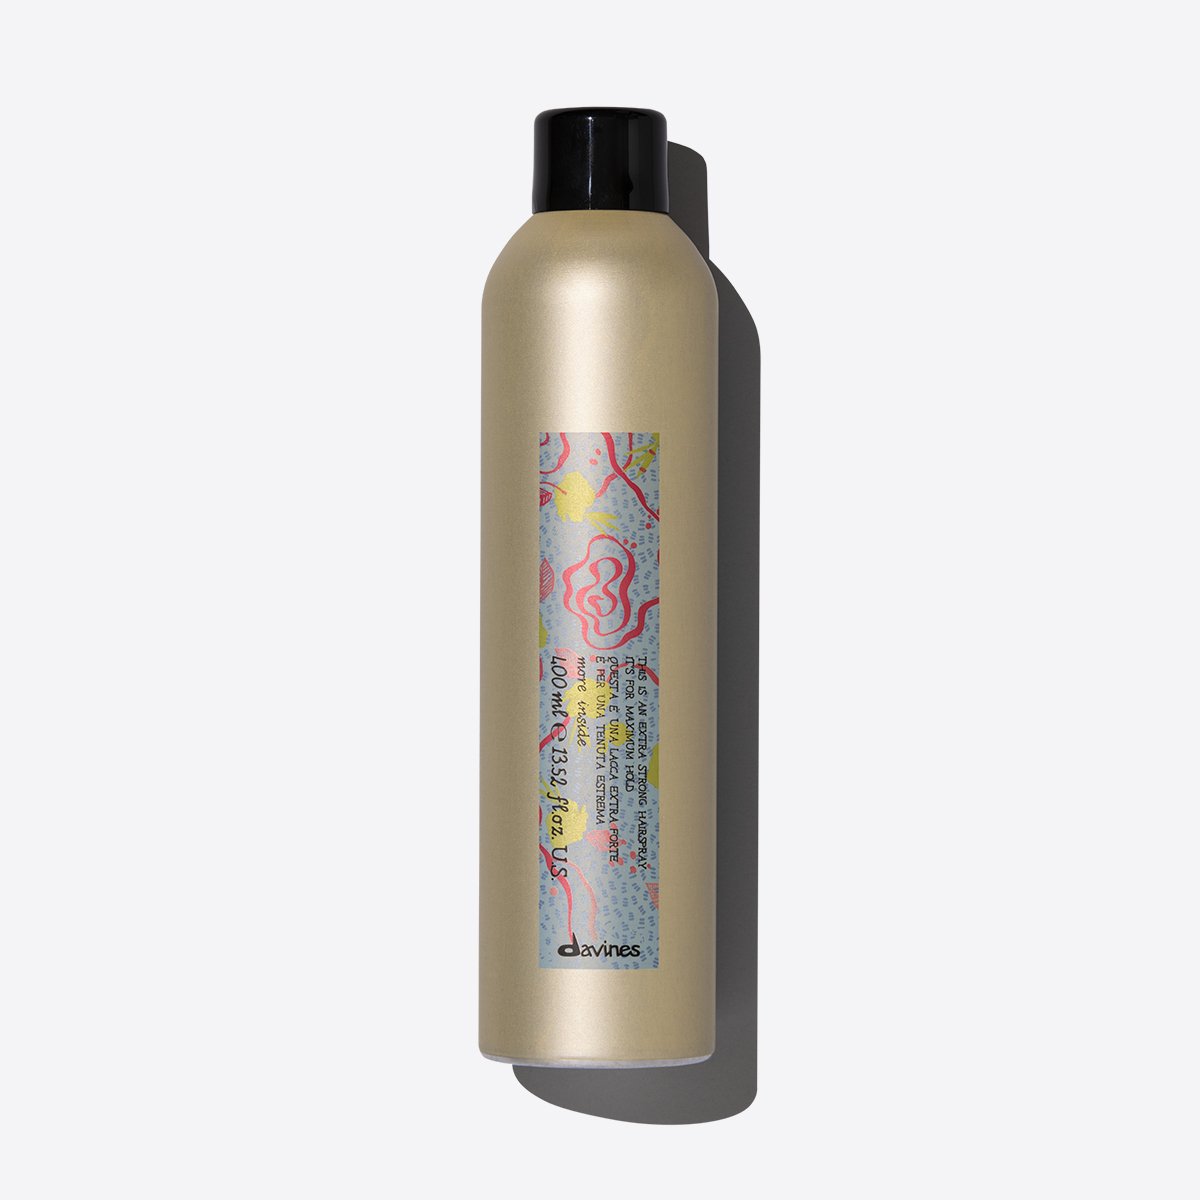 This is an extra strong hairspray 1  340 gr / 0 oz.Davines
